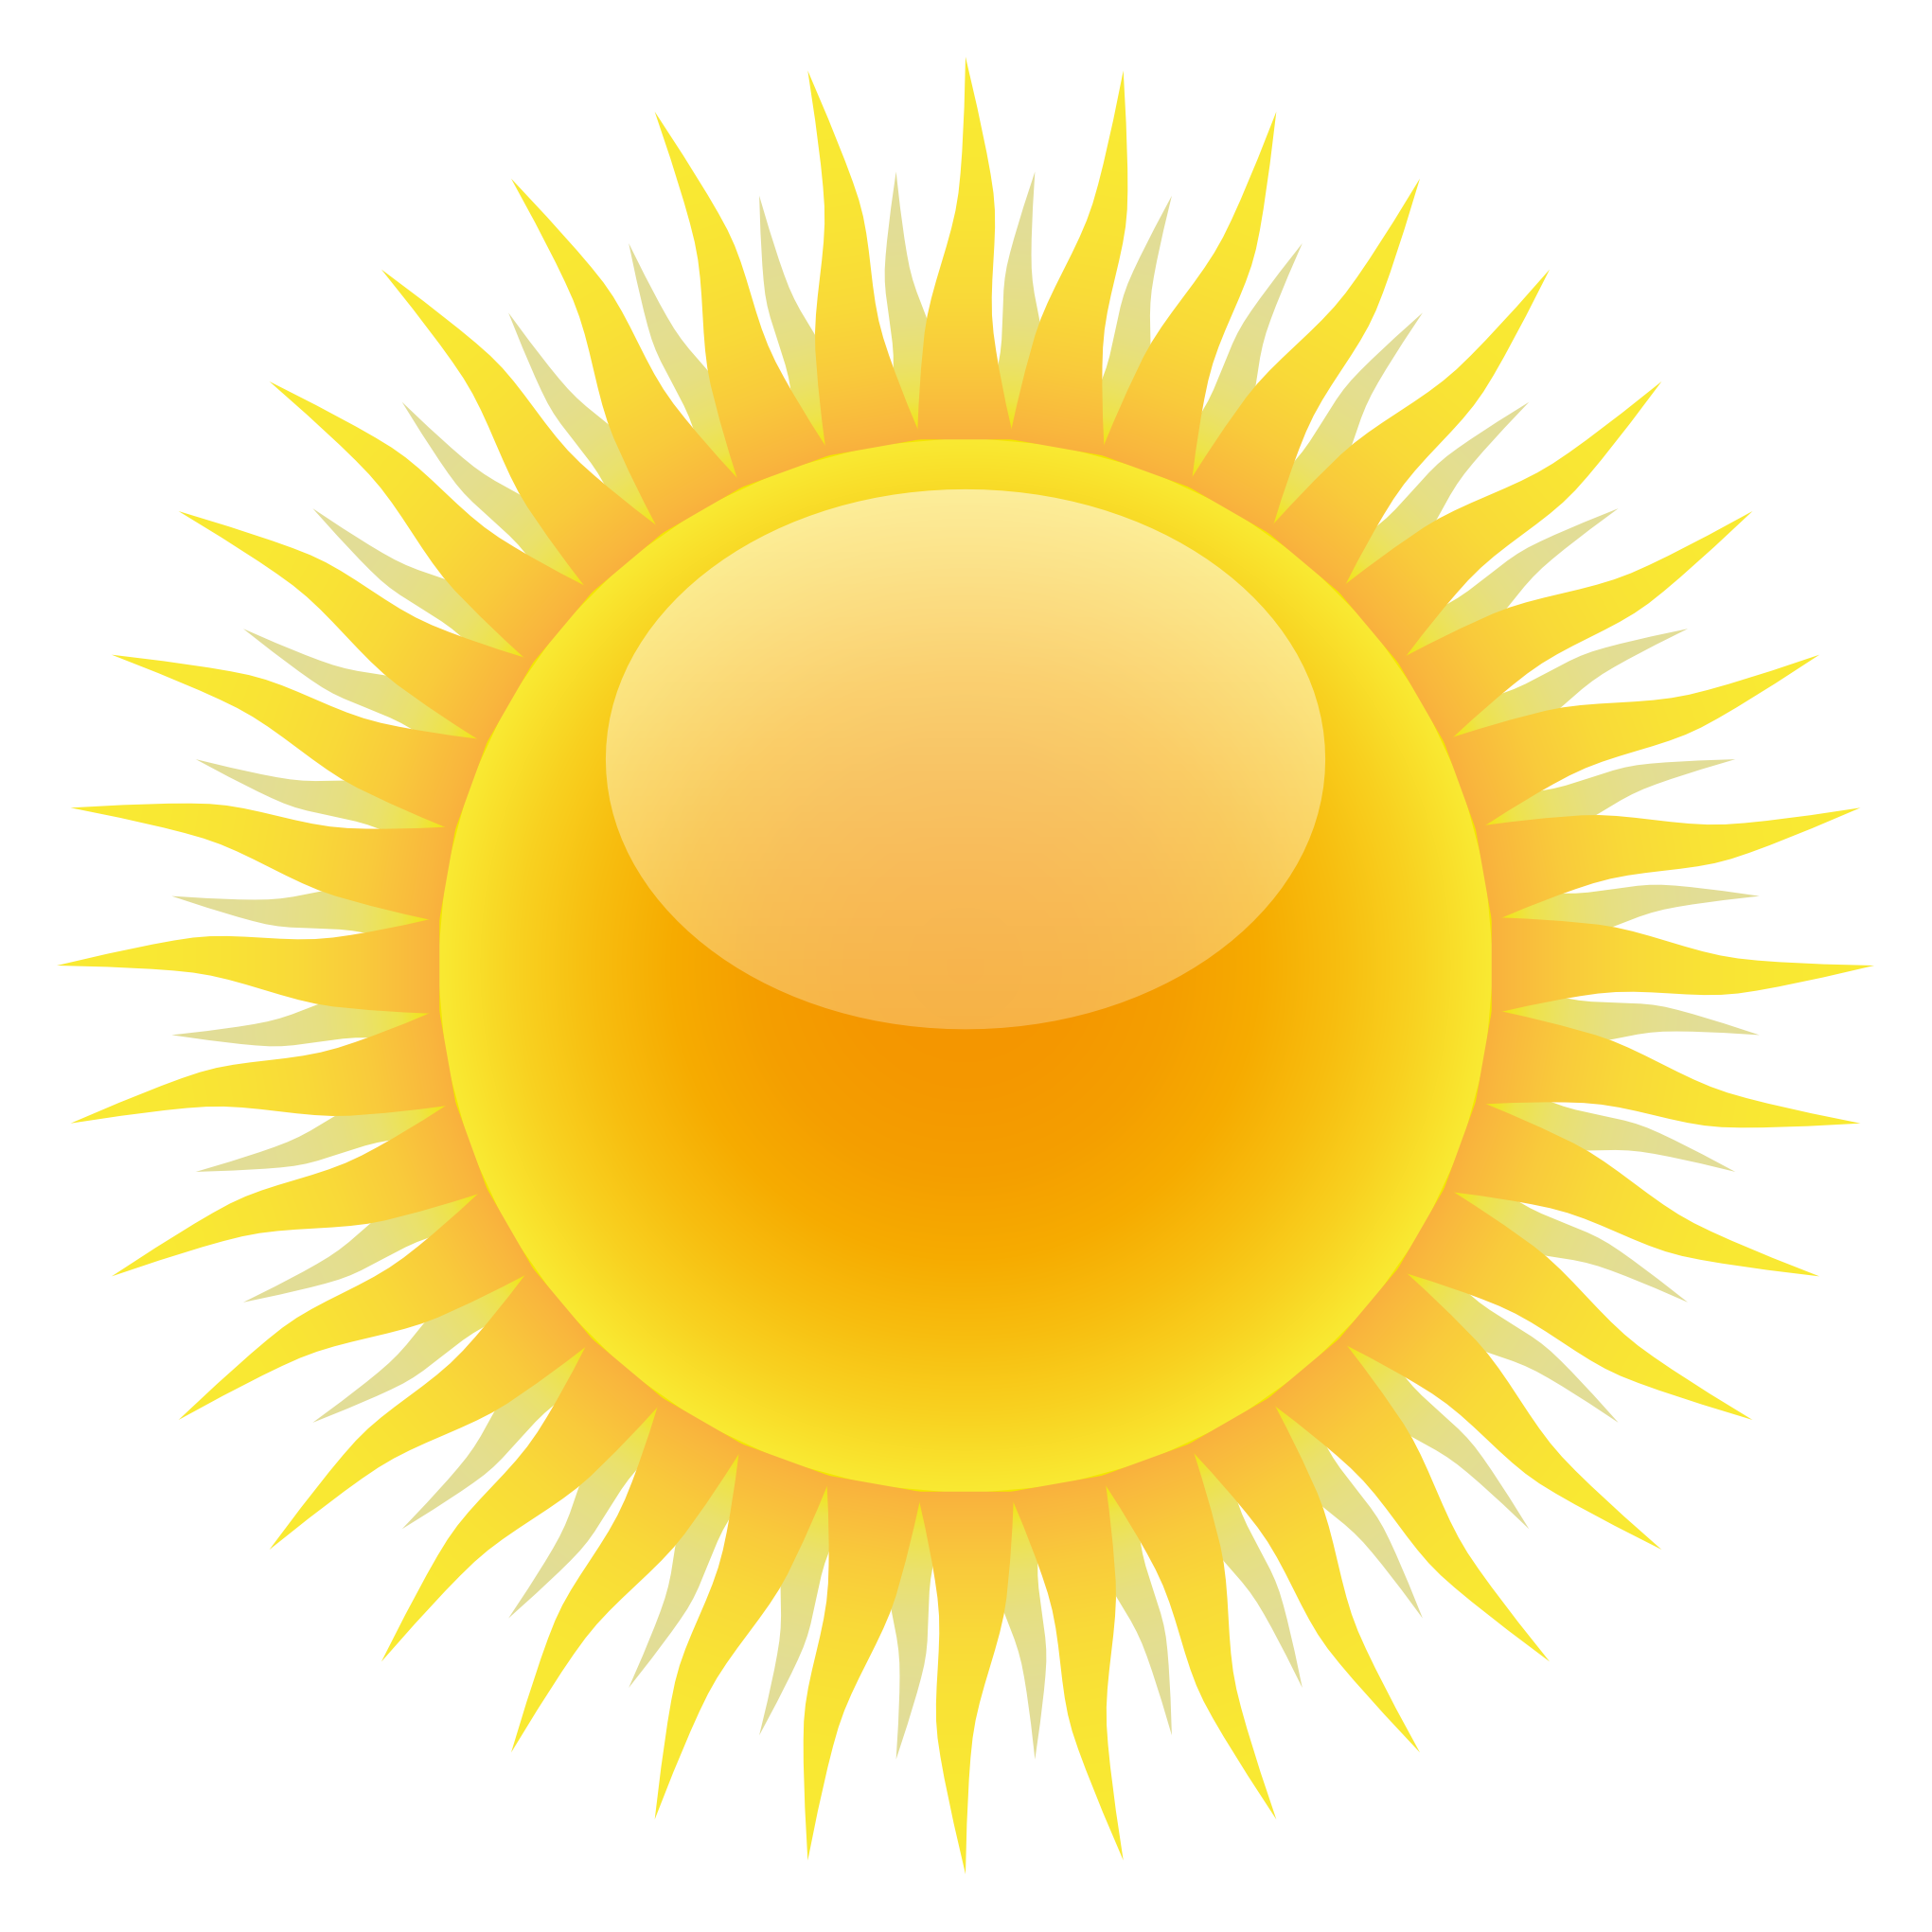 Sun PNG Image - PurePNG | Free transparent CC0 PNG Image Library